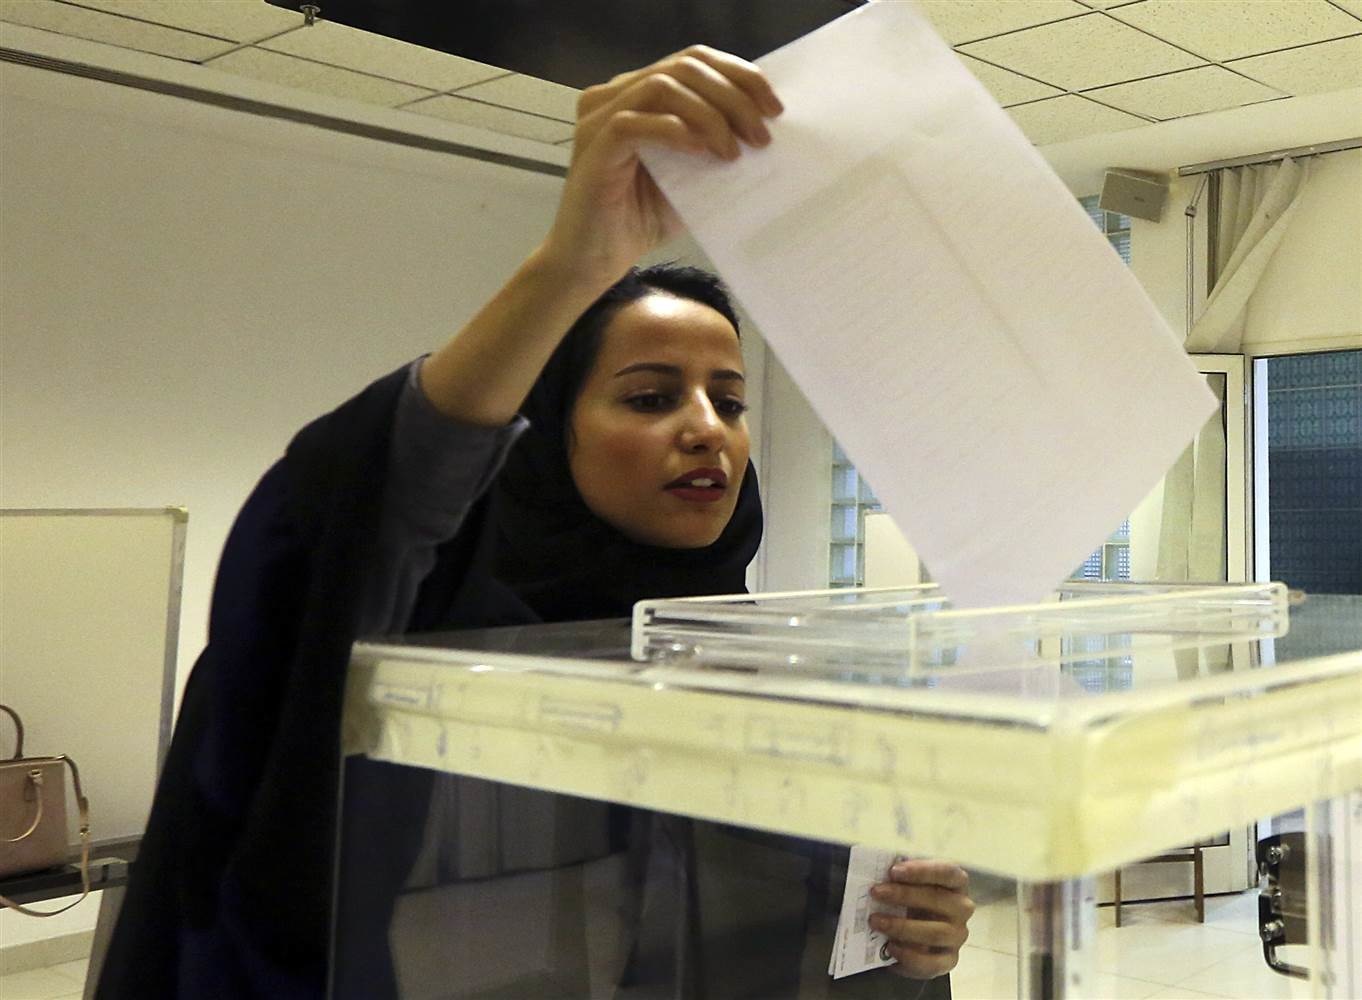 In a historic election held on December 12, Saudi Arabian women voted for the first time and 17 were elected to public office.